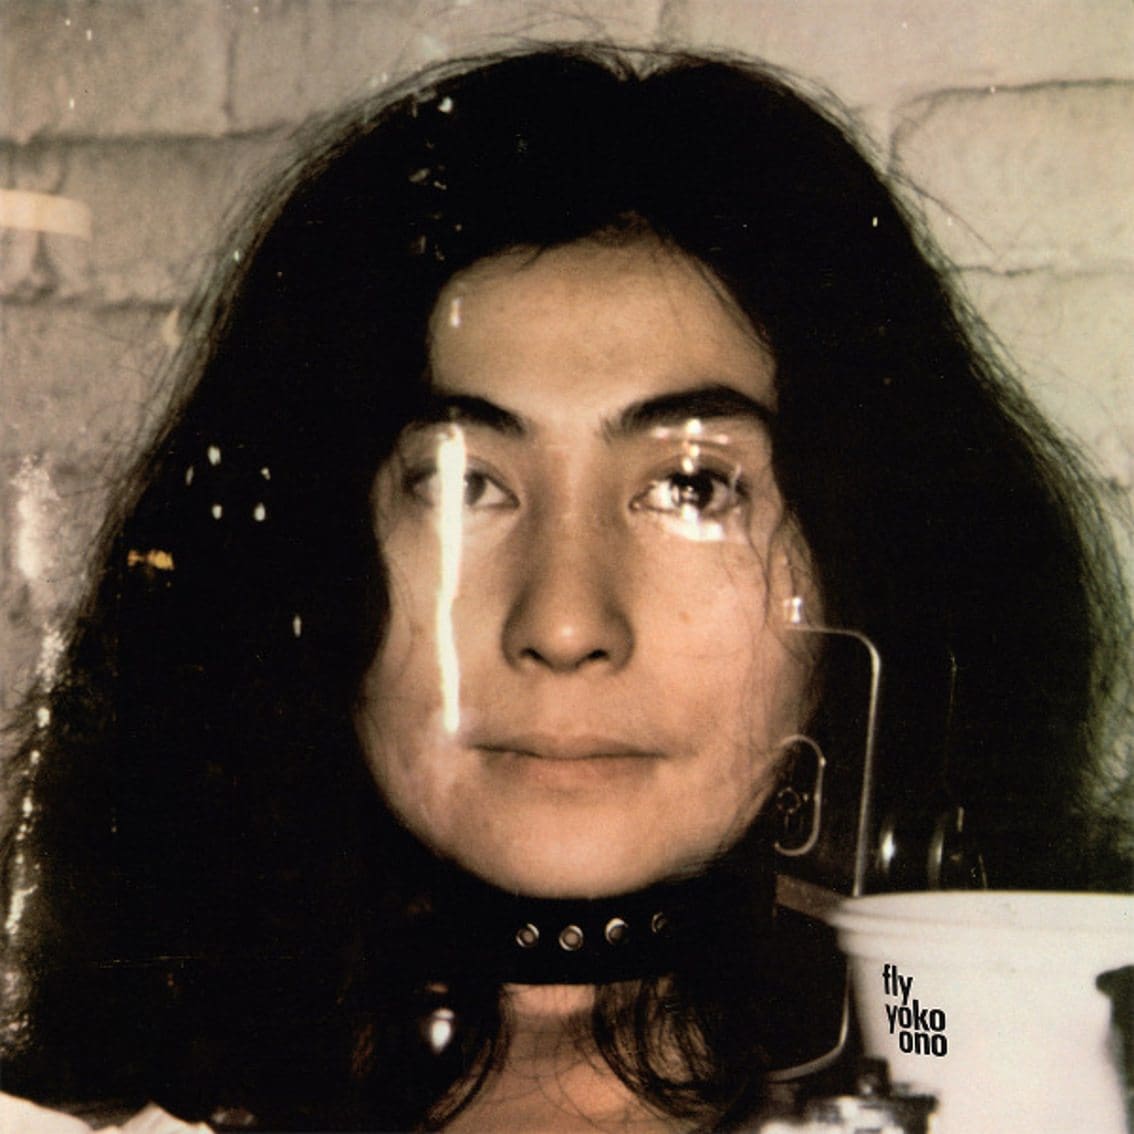 One for the experimental fans, Yoko Ono's 'Fly' album reissued with bonus tracks and on white vinyl!